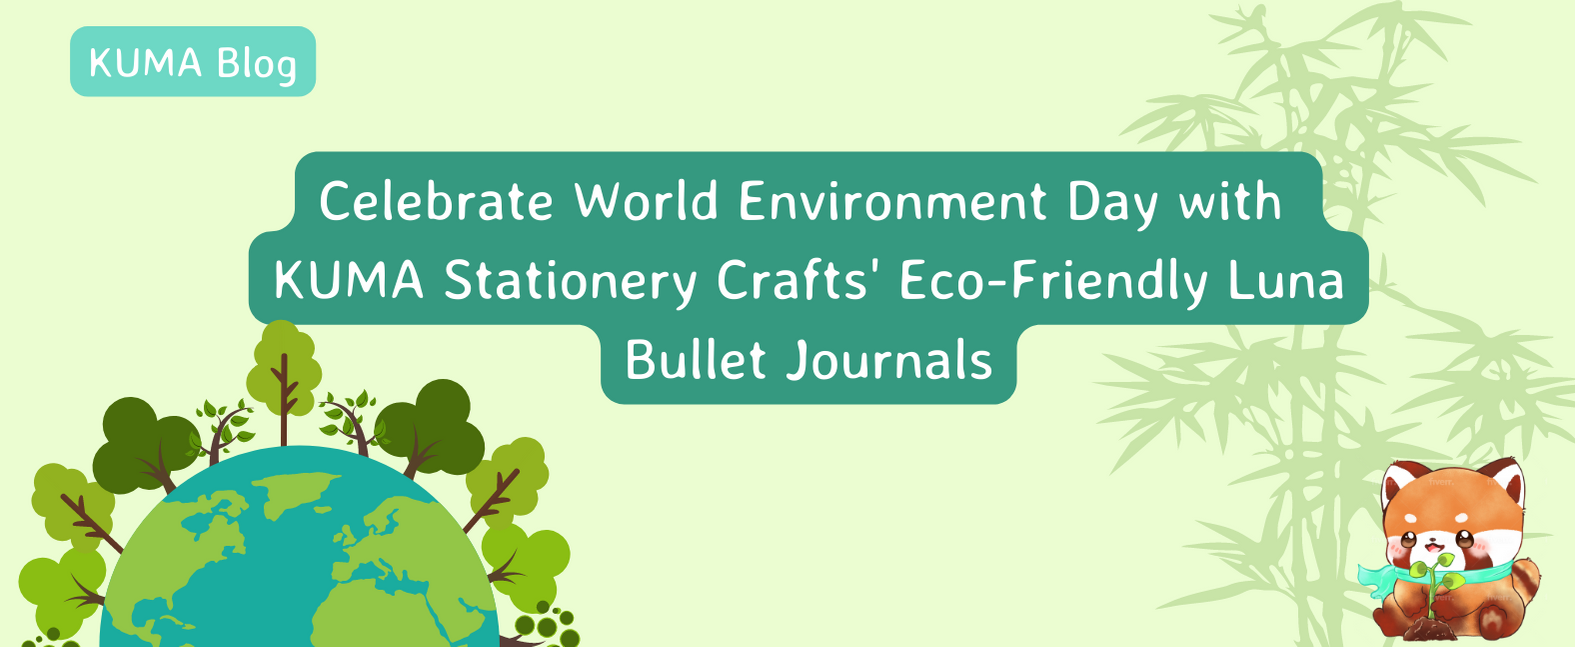 Celebrate World Environment Day with KUMA Stationery Crafts' Eco-Friendly Luna Bullet Journals